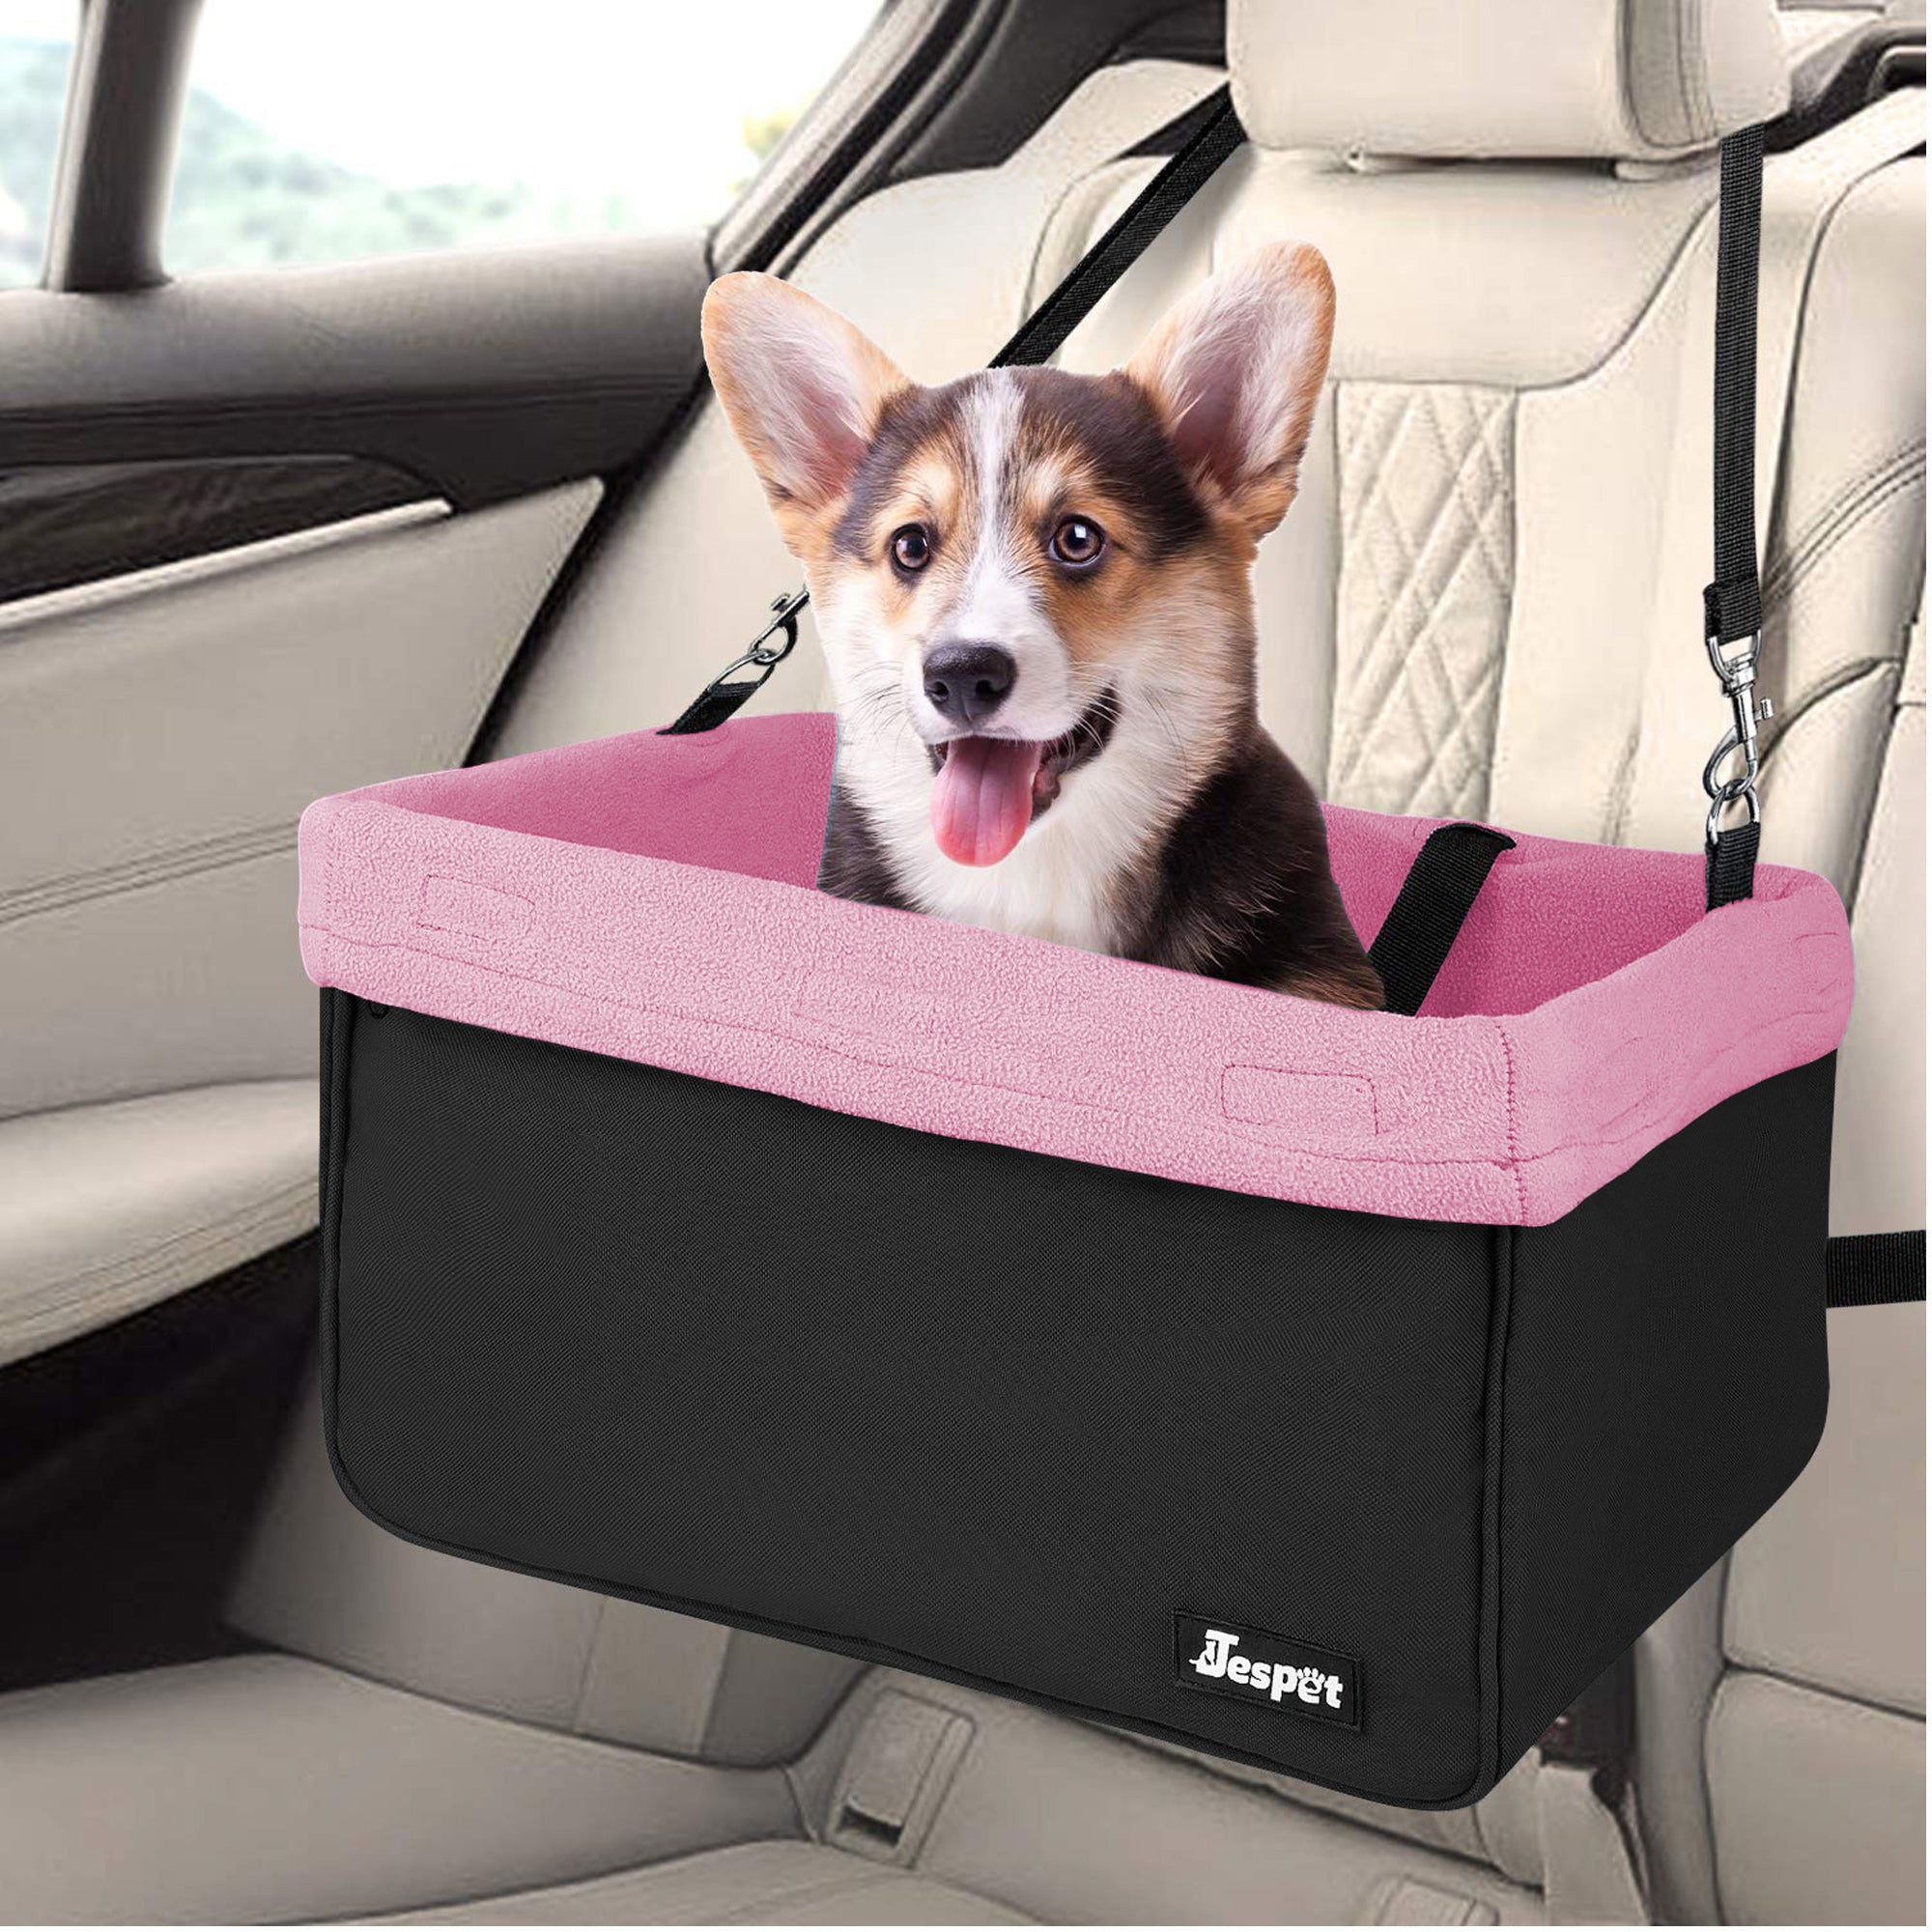 GOOPAWS Portable Pet Safety Booster Dog Car Seat with Seat Belt, Pink